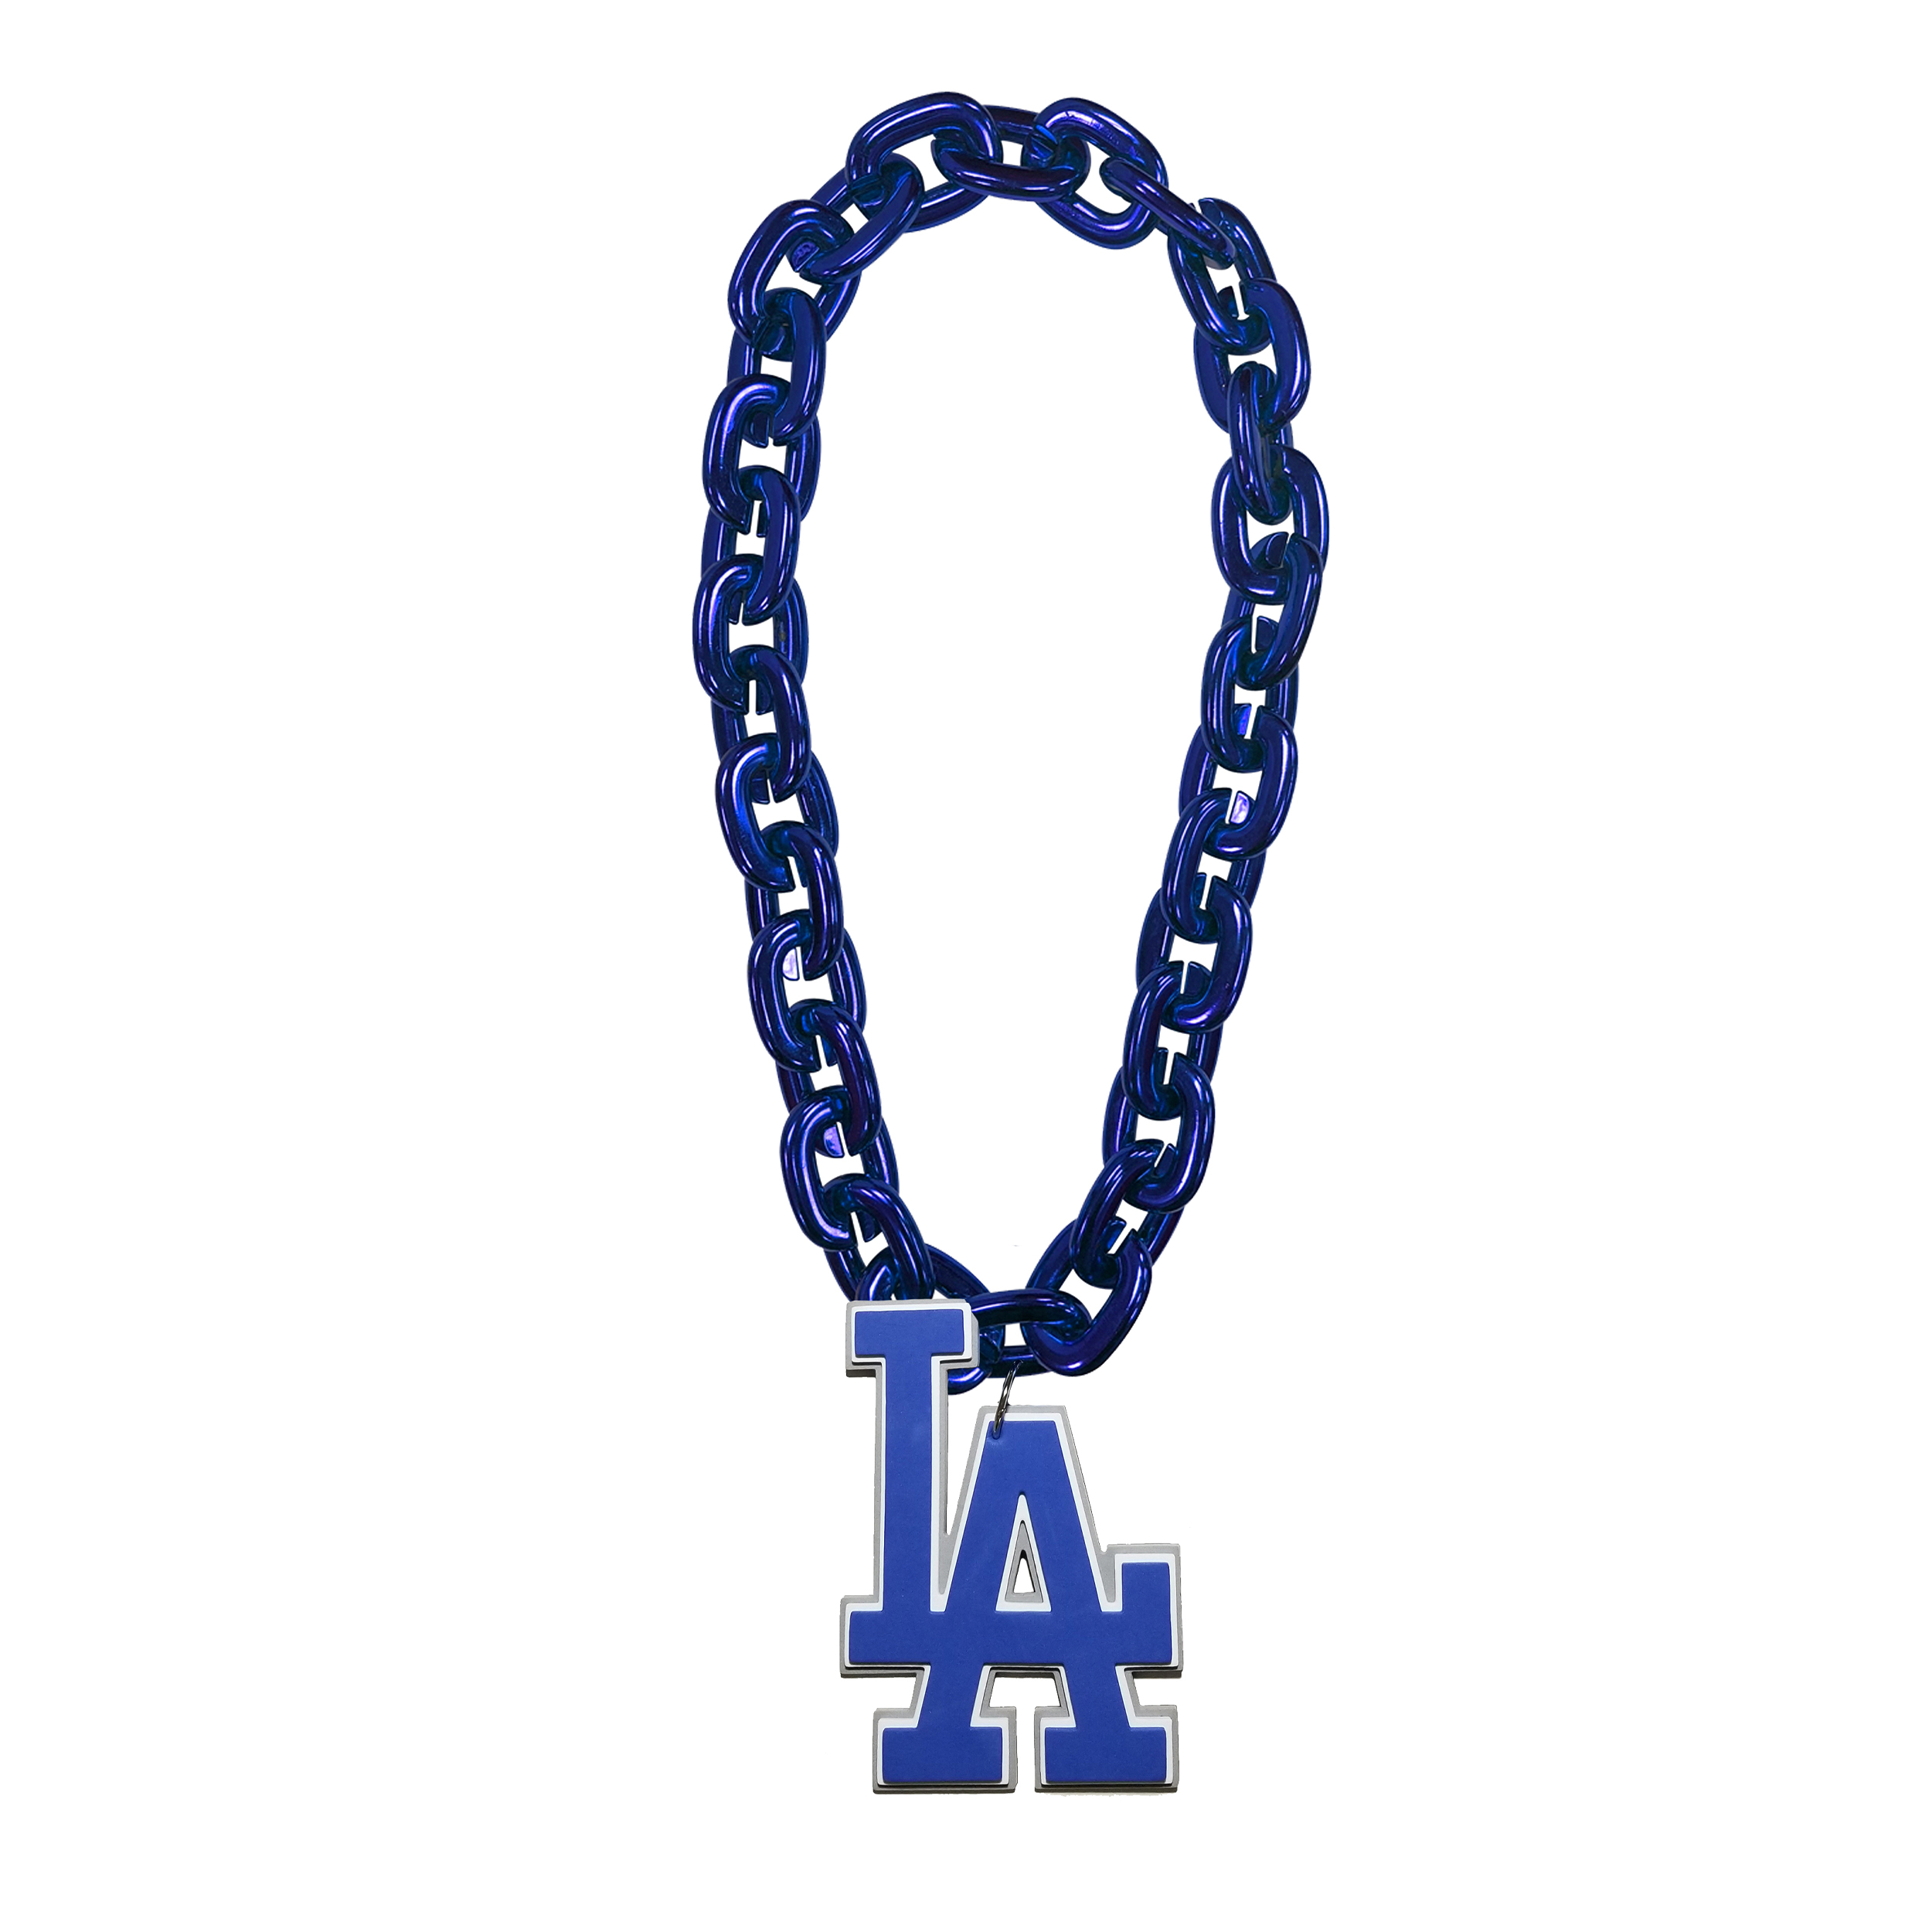 Los Angeles Dodgers on X: Put a ring on it.